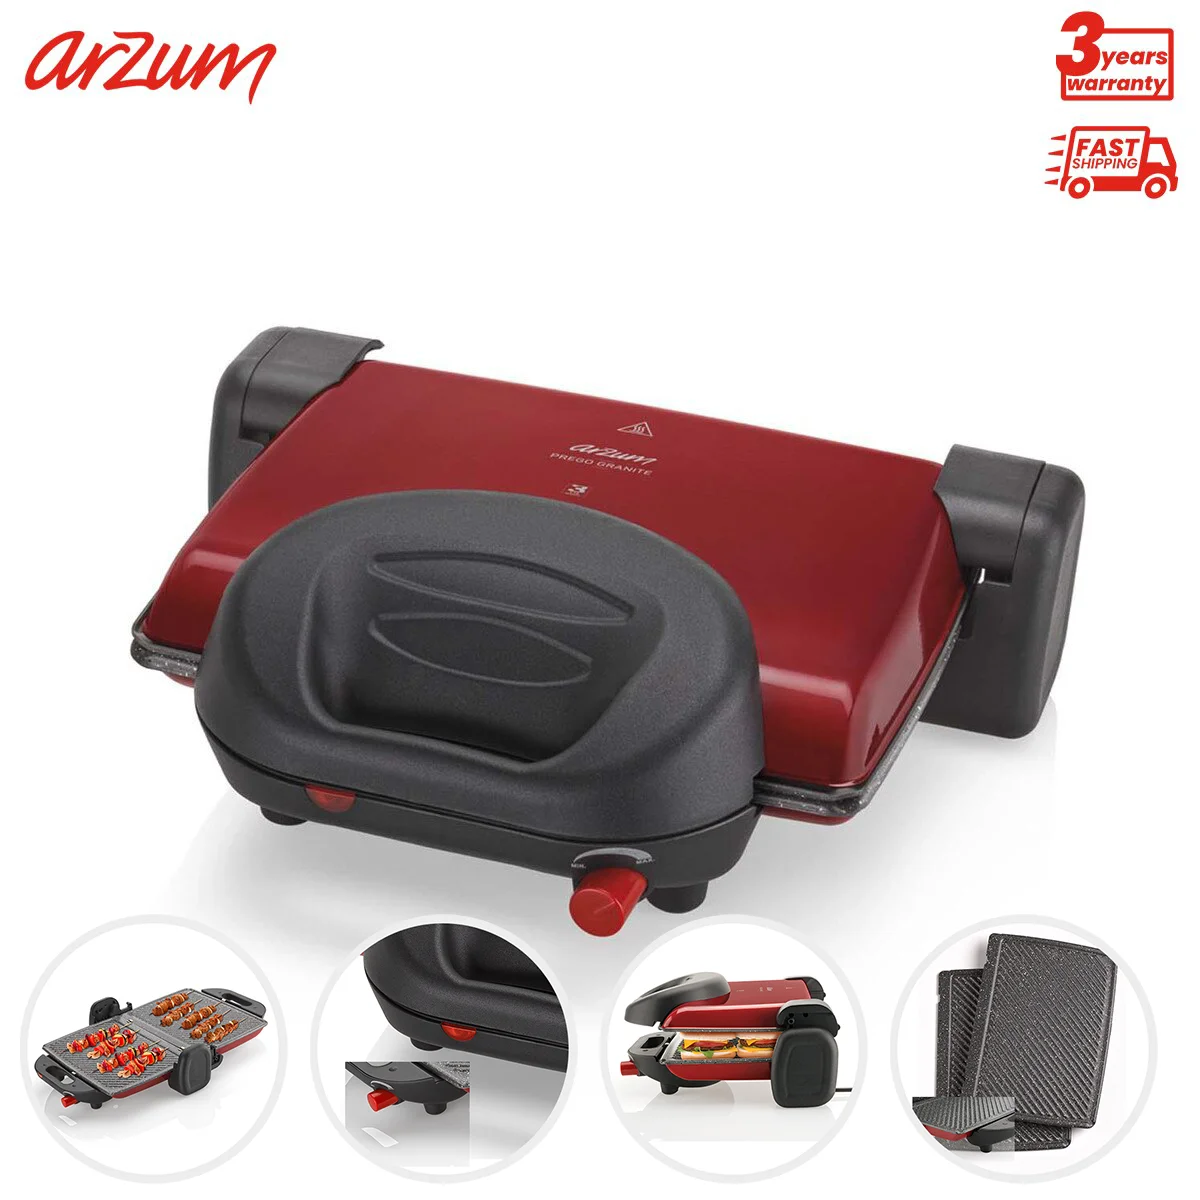 

Arzum Panini Prego Granite Grill And Sandwich Maker Electrical Sandwich Maker Breakfast Machine Household Baking Toaster With Floating Hinge System Granite Effect Removable Plates Vertical Storage Thermostat Light